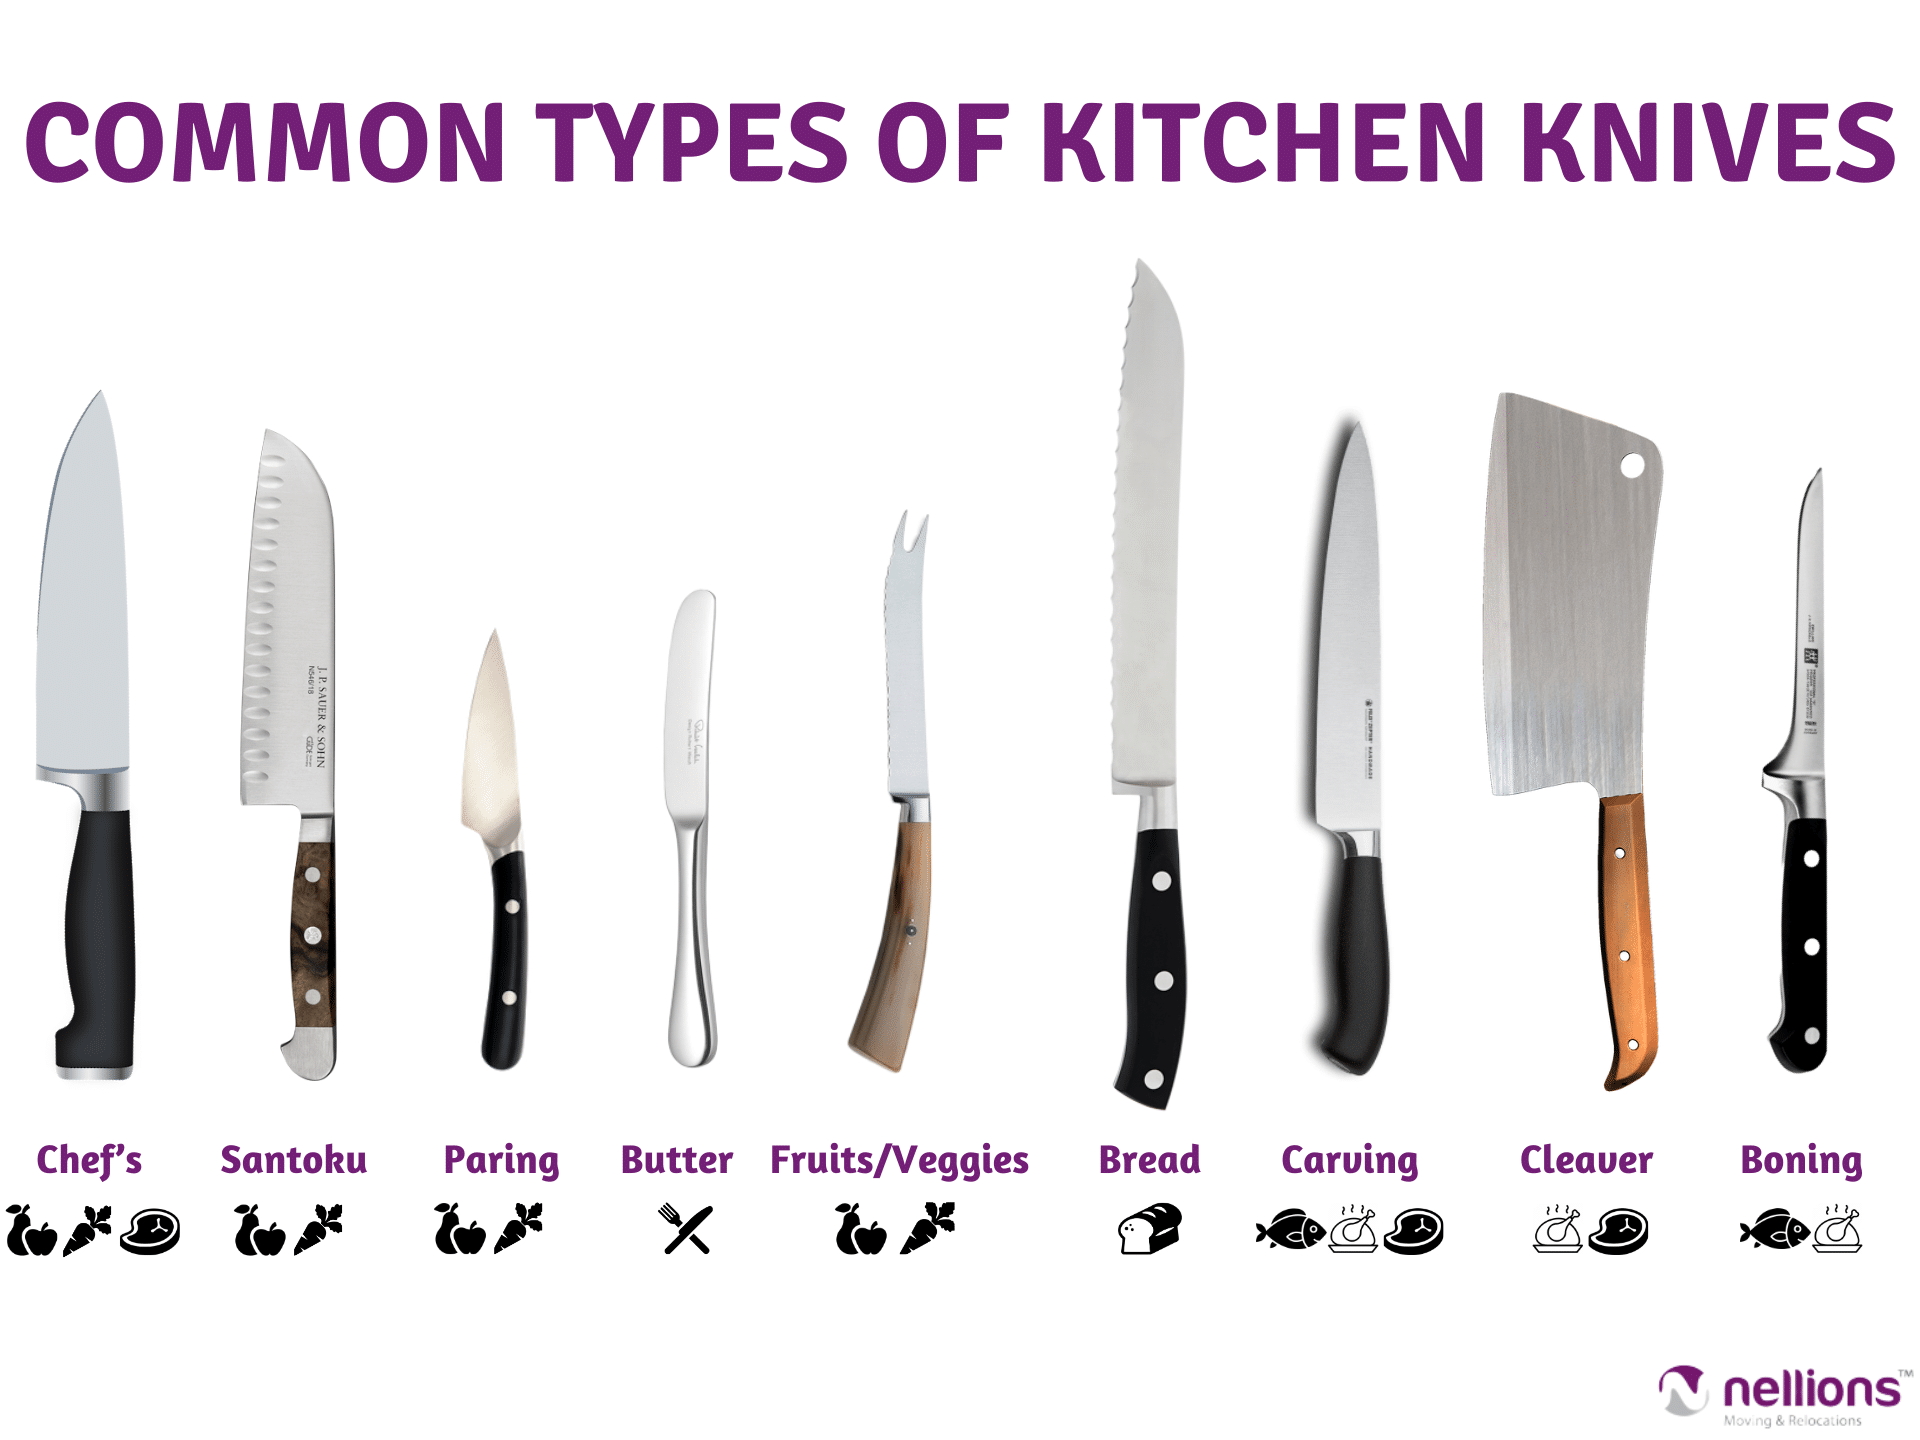 Cyclops Human Månenytår All about Knives: Types, Moving Instructions, and How to Store Them